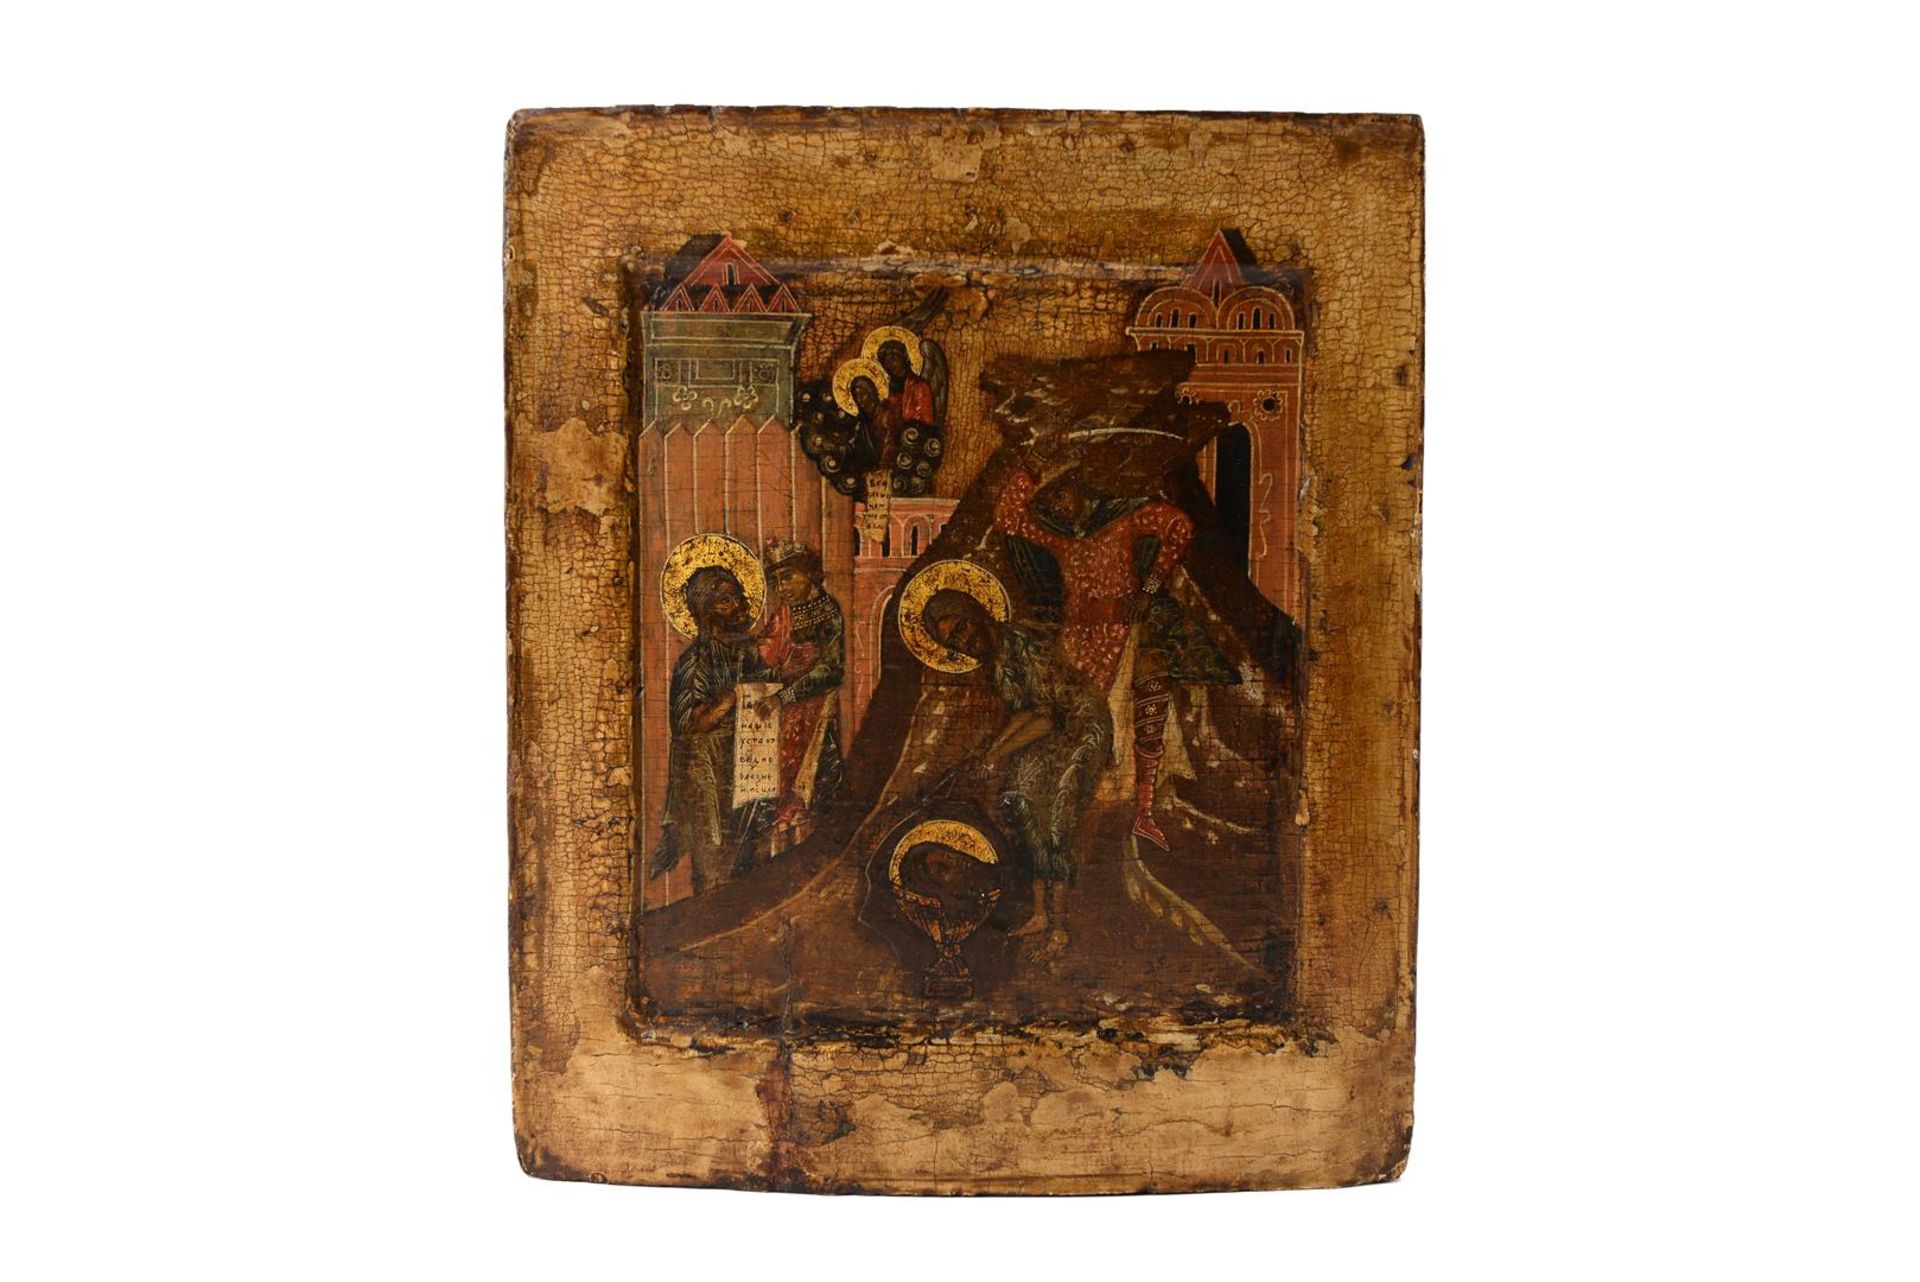 A wooden icon depicting the beheading of John. Russia, 17th century. Incl. documentation.